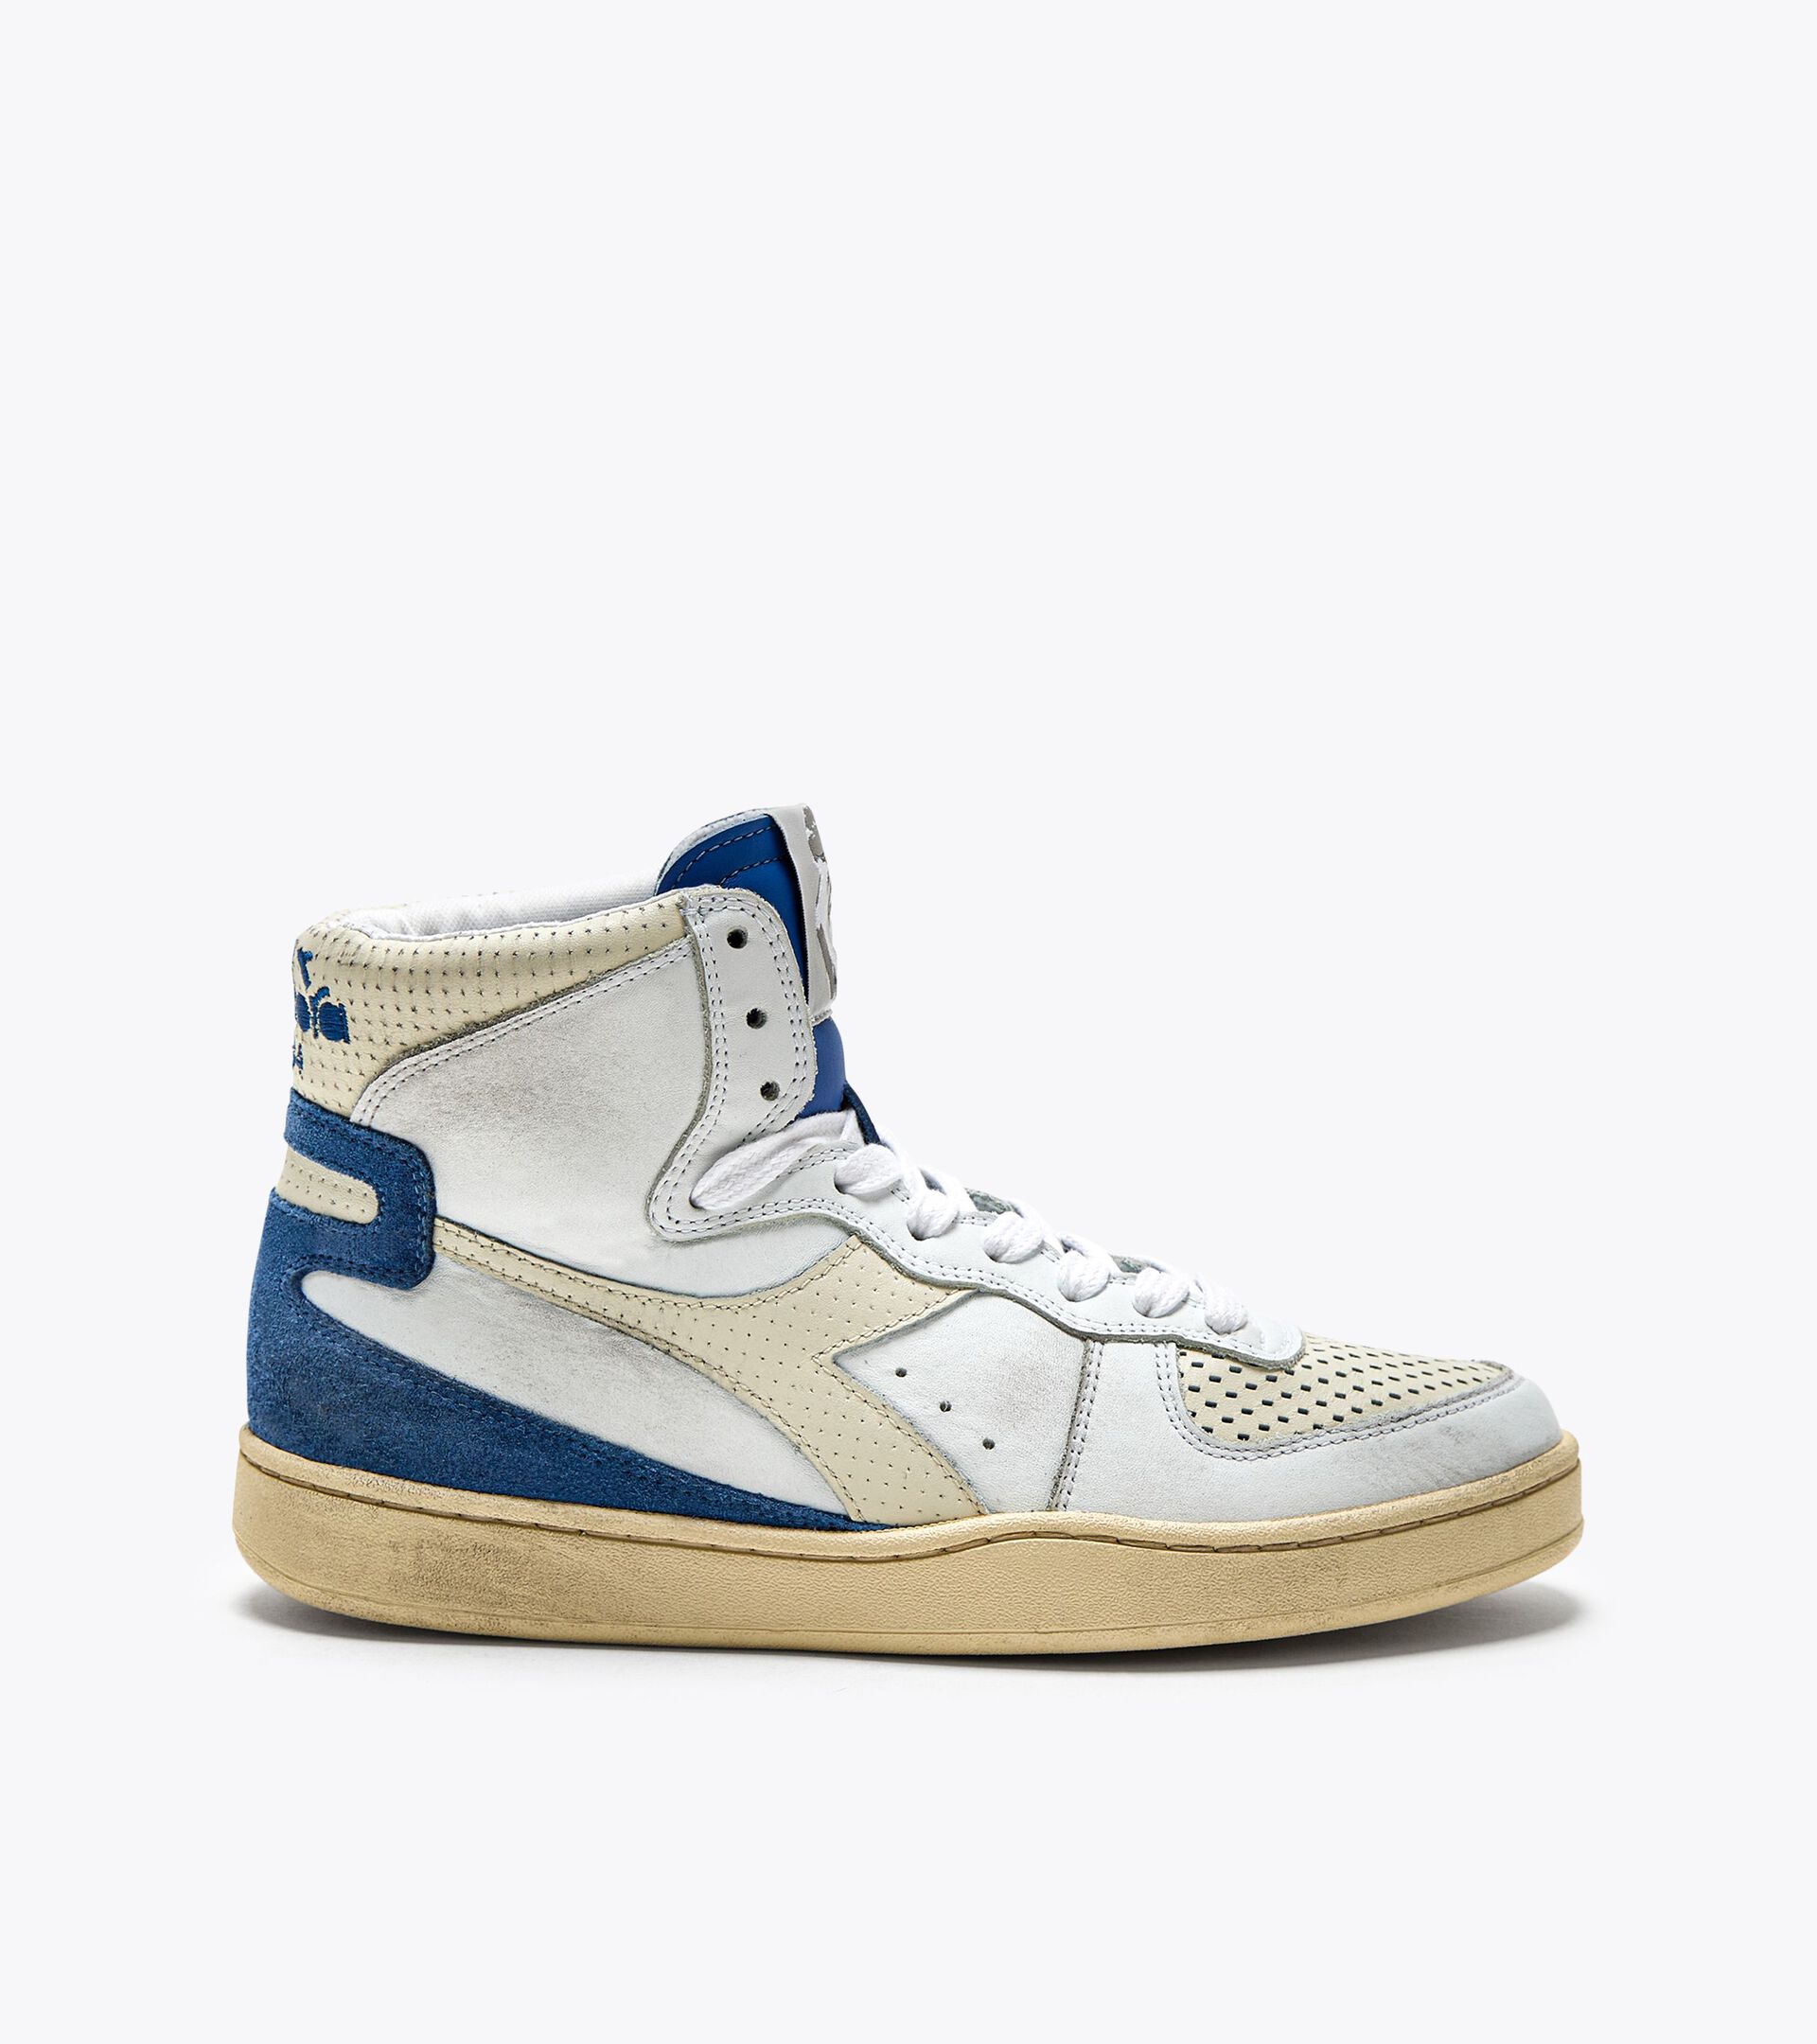 Heritage shoe - Made In Italy - Gender Neutral MI BASKET PUNCHED ITA X DINO MENEGHIN WHITE/DELFT - Diadora